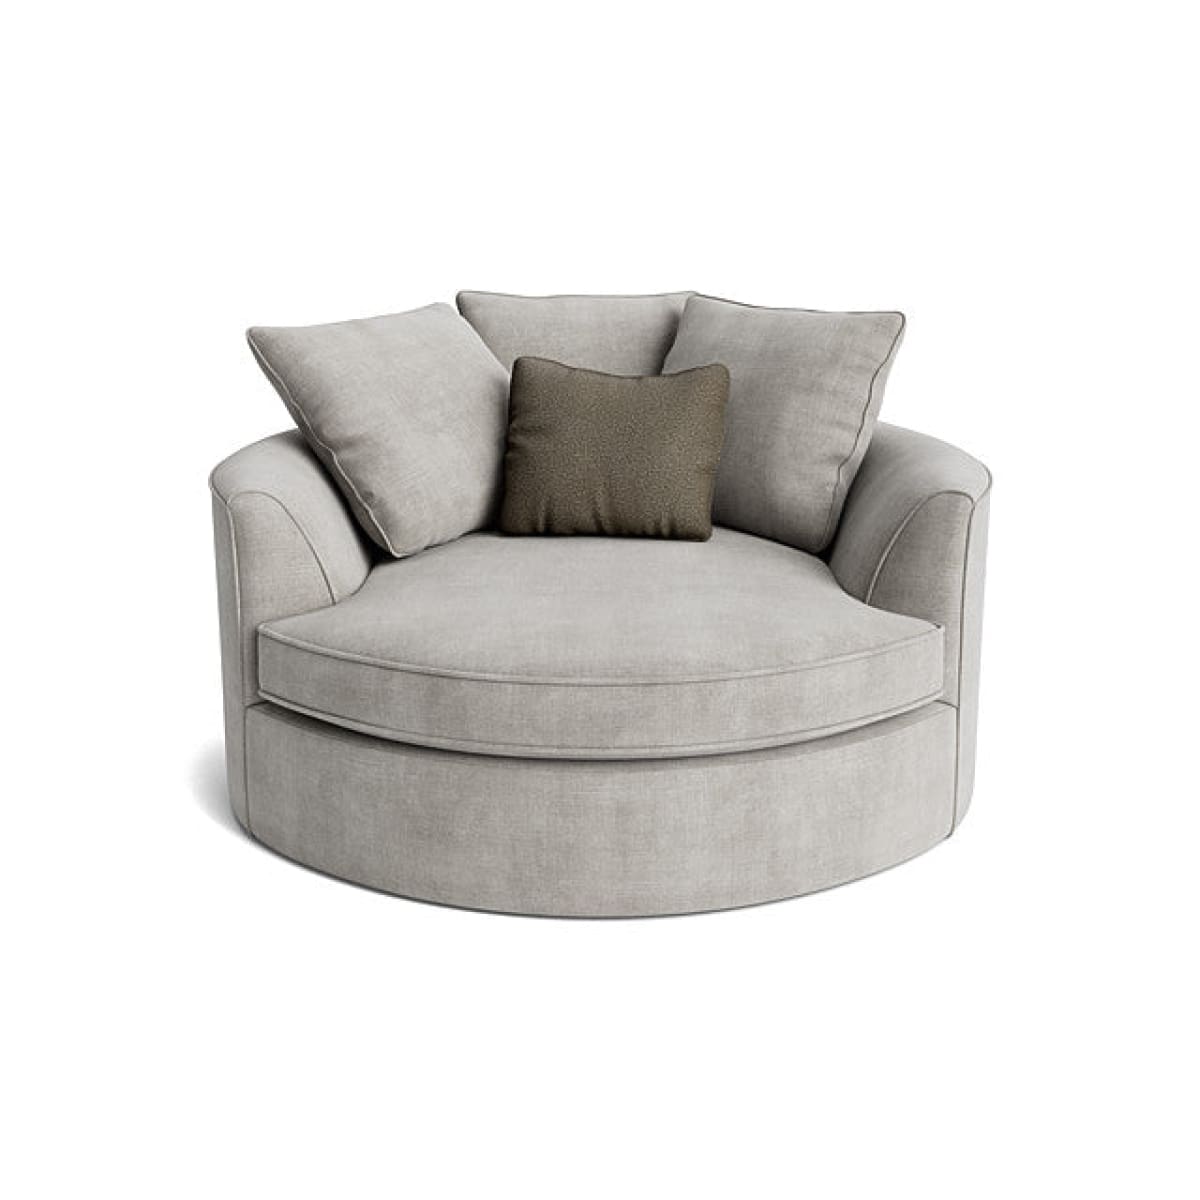 Nest Accent Chair - Analogy Gray